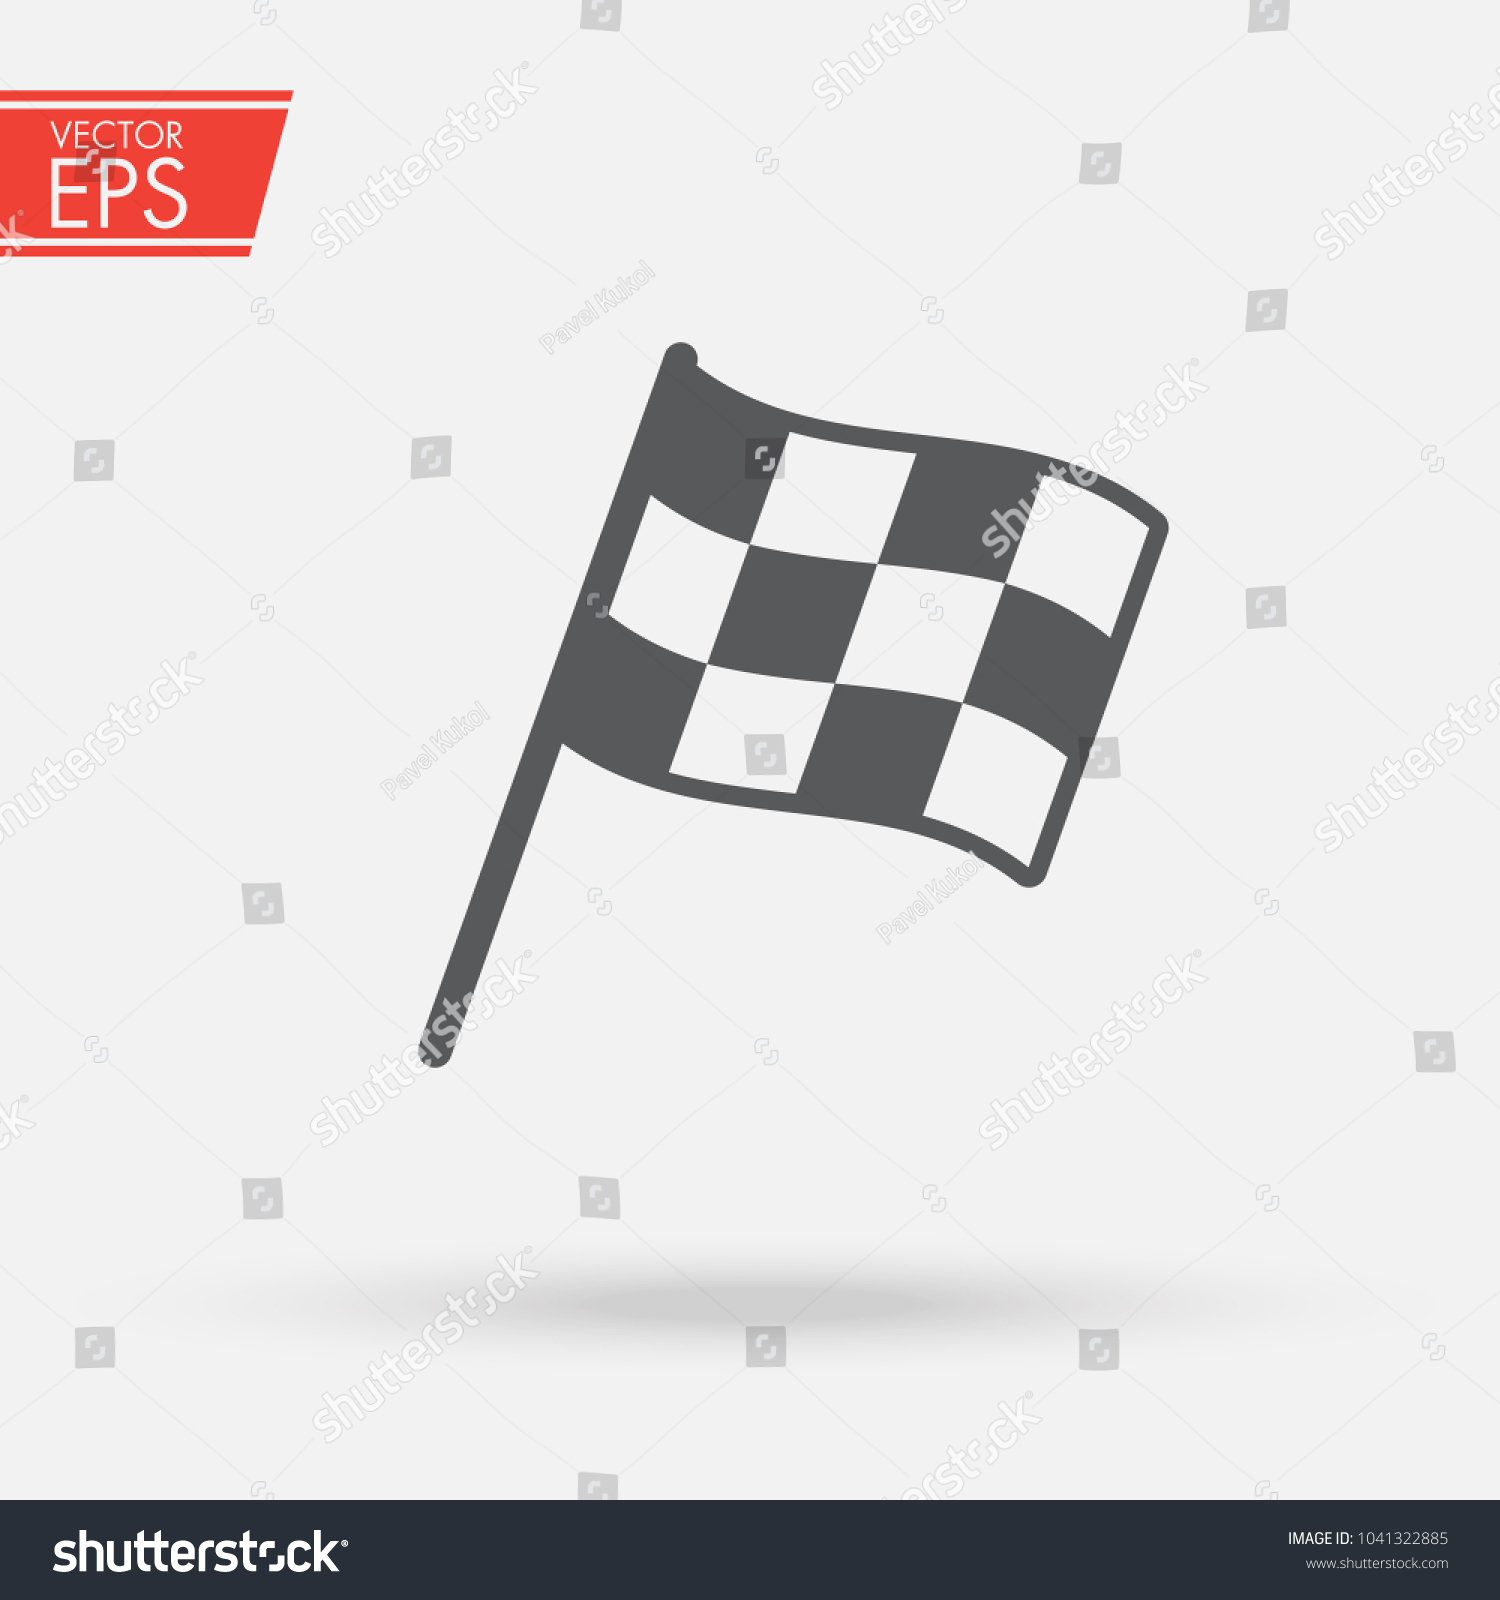 Checkered racing flag icon. Starting flag auto and moto racing. Sport car competition victory sign. Finishing winner rally illustration. Chequered racing flag on flagstaff. Black and white flag. #1041322885